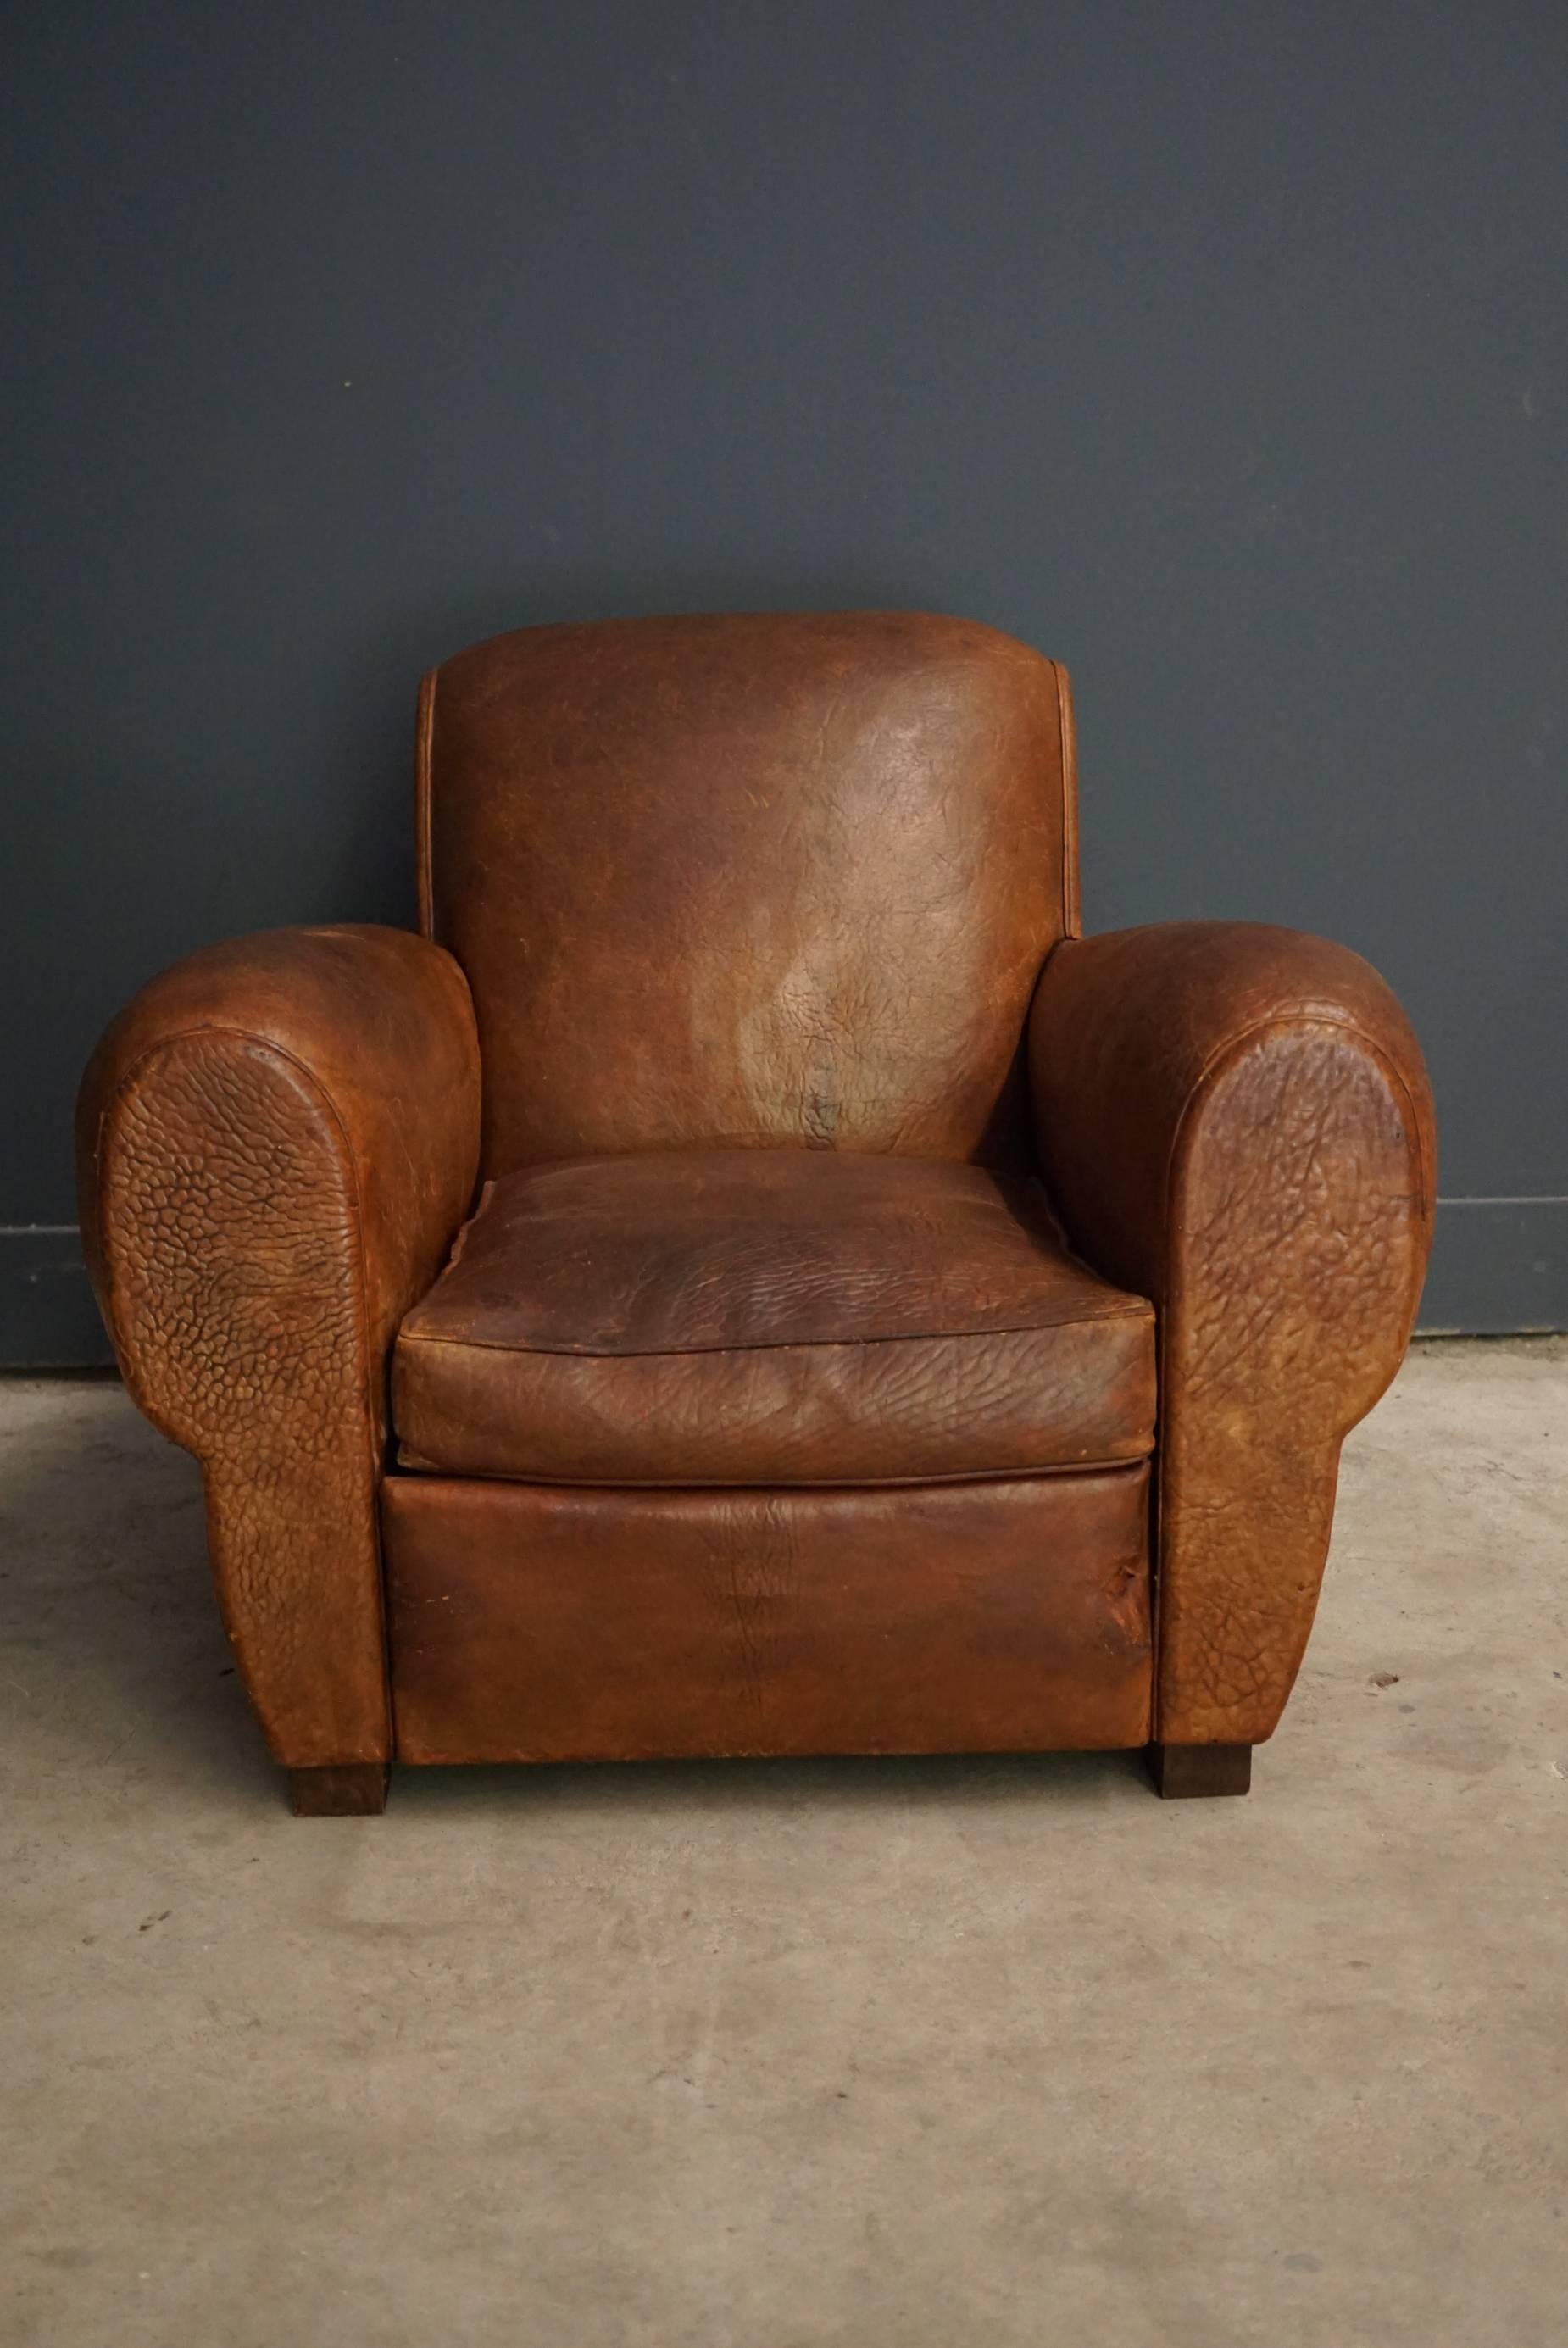 Industrial French Cognac Leather Club Chair, 1940s